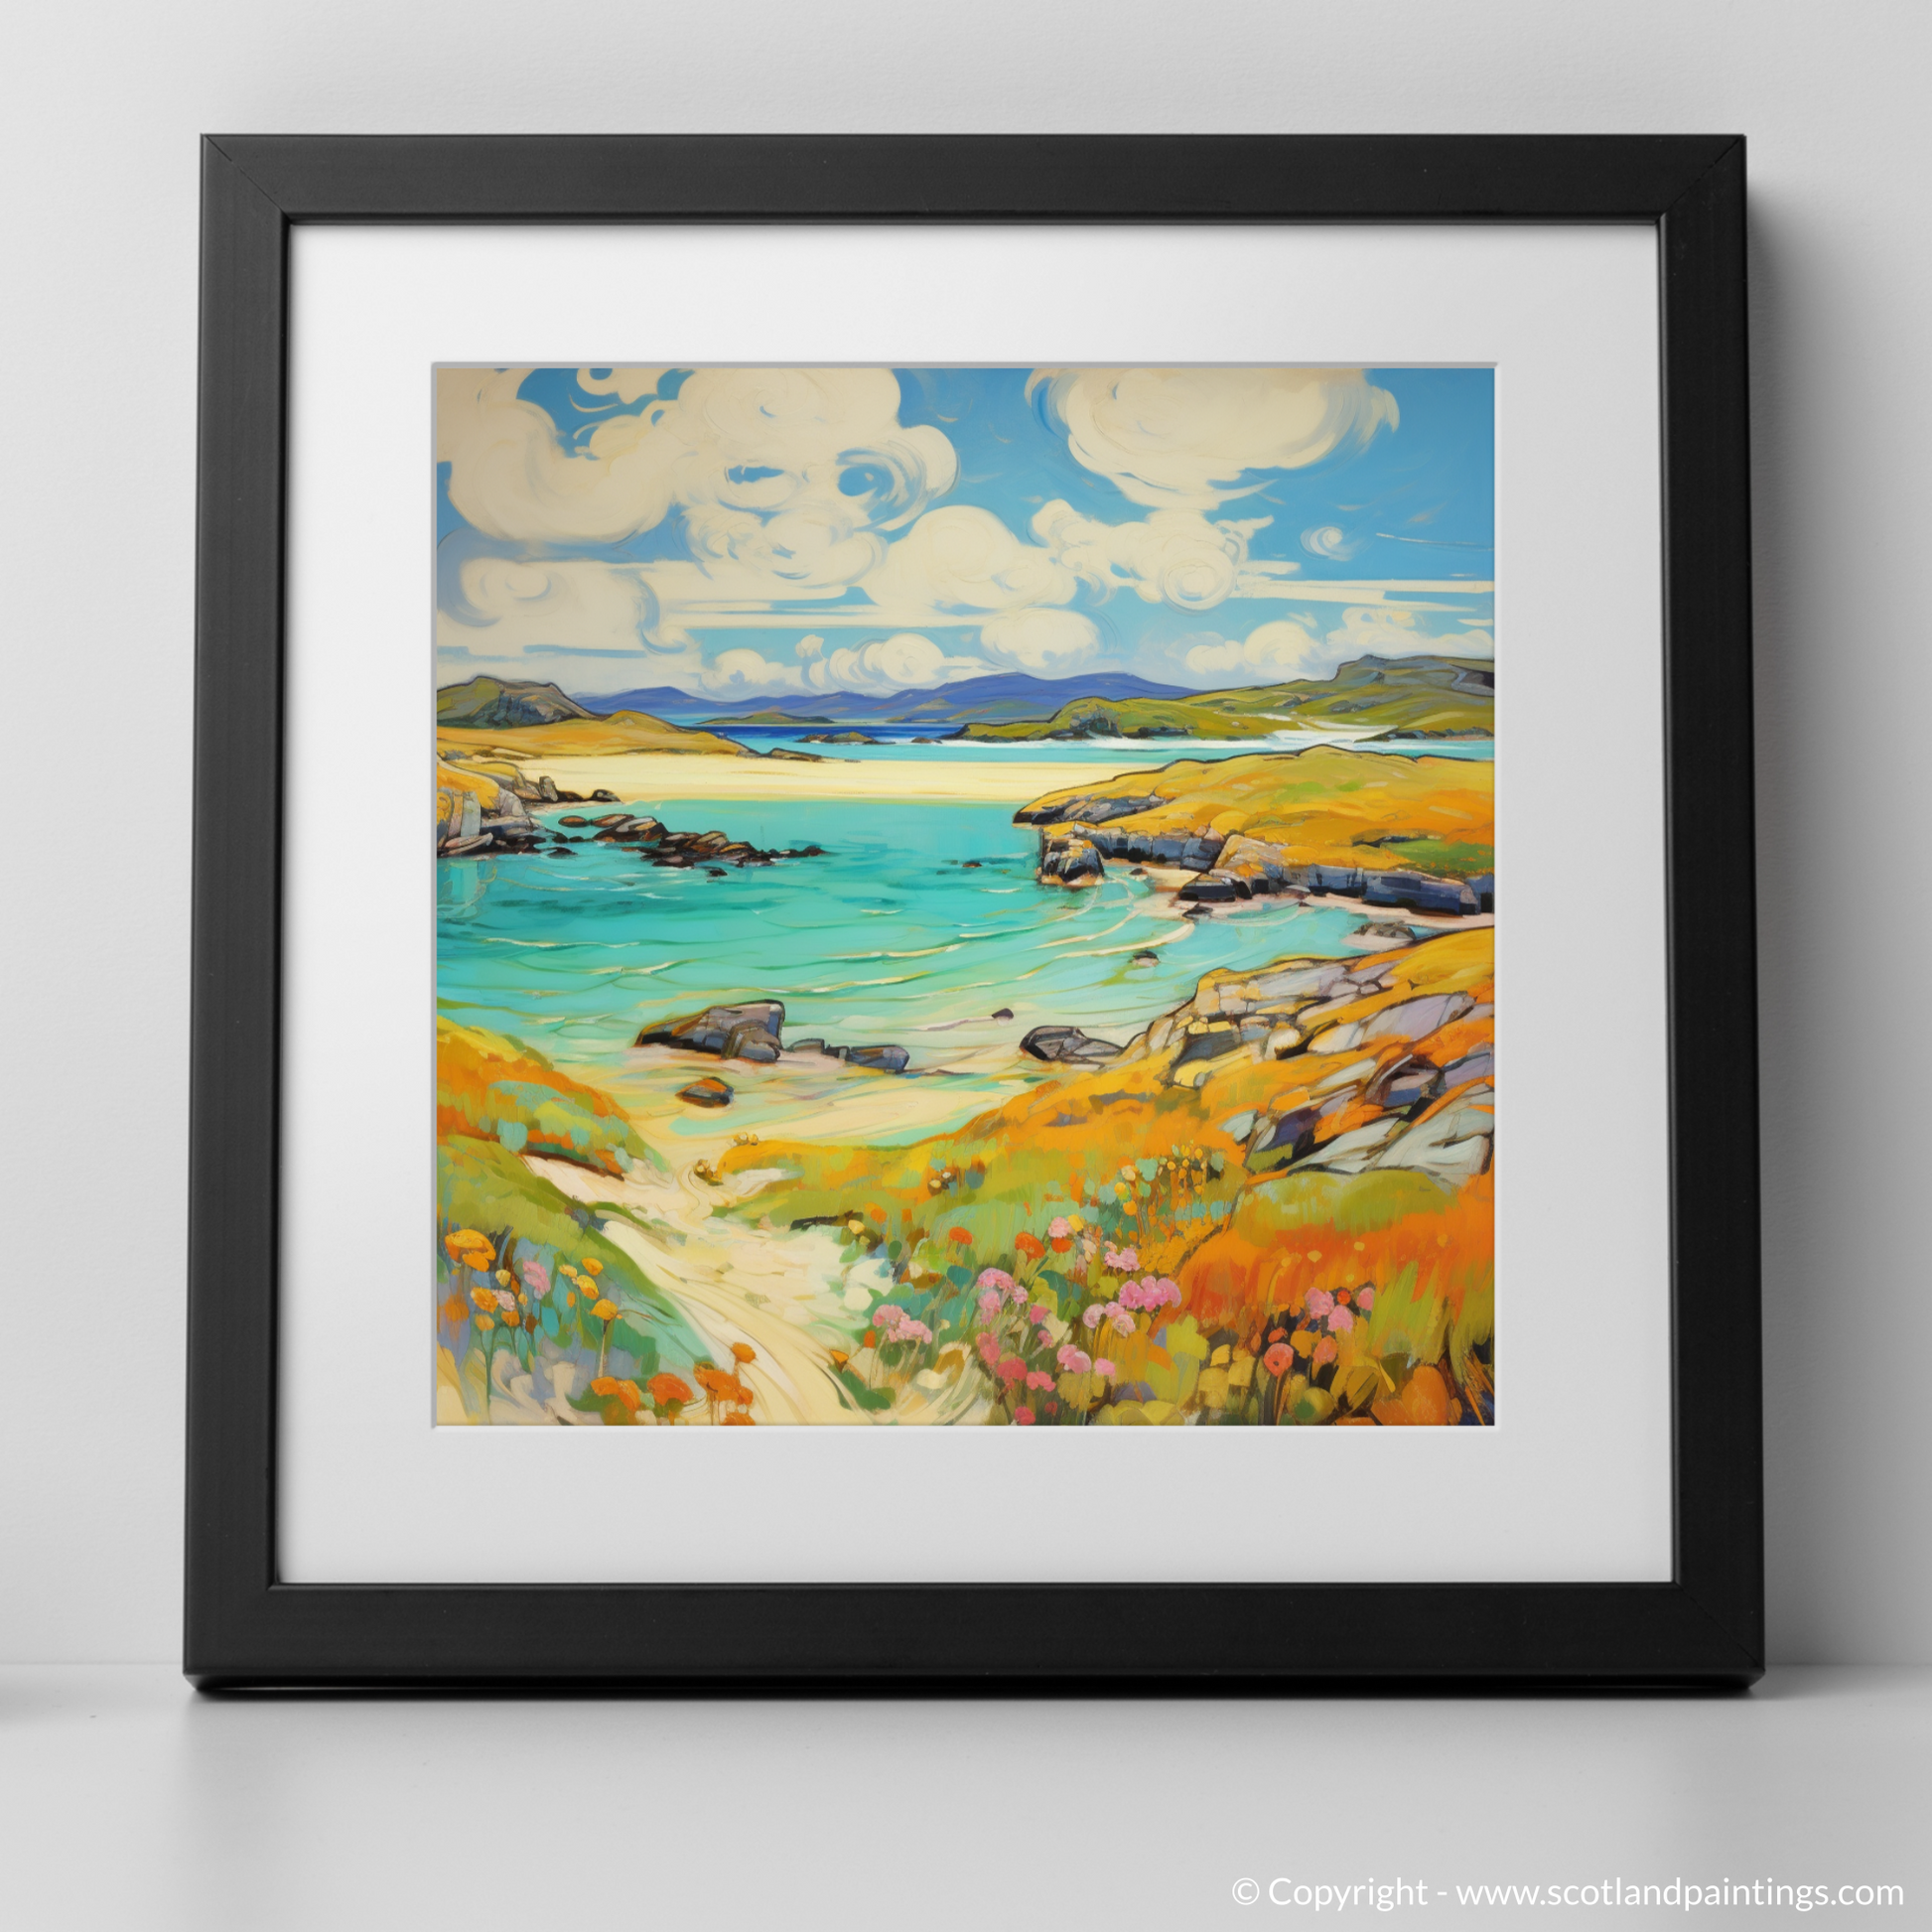 Art Print of Isle of Lewis, Outer Hebrides in summer with a black frame